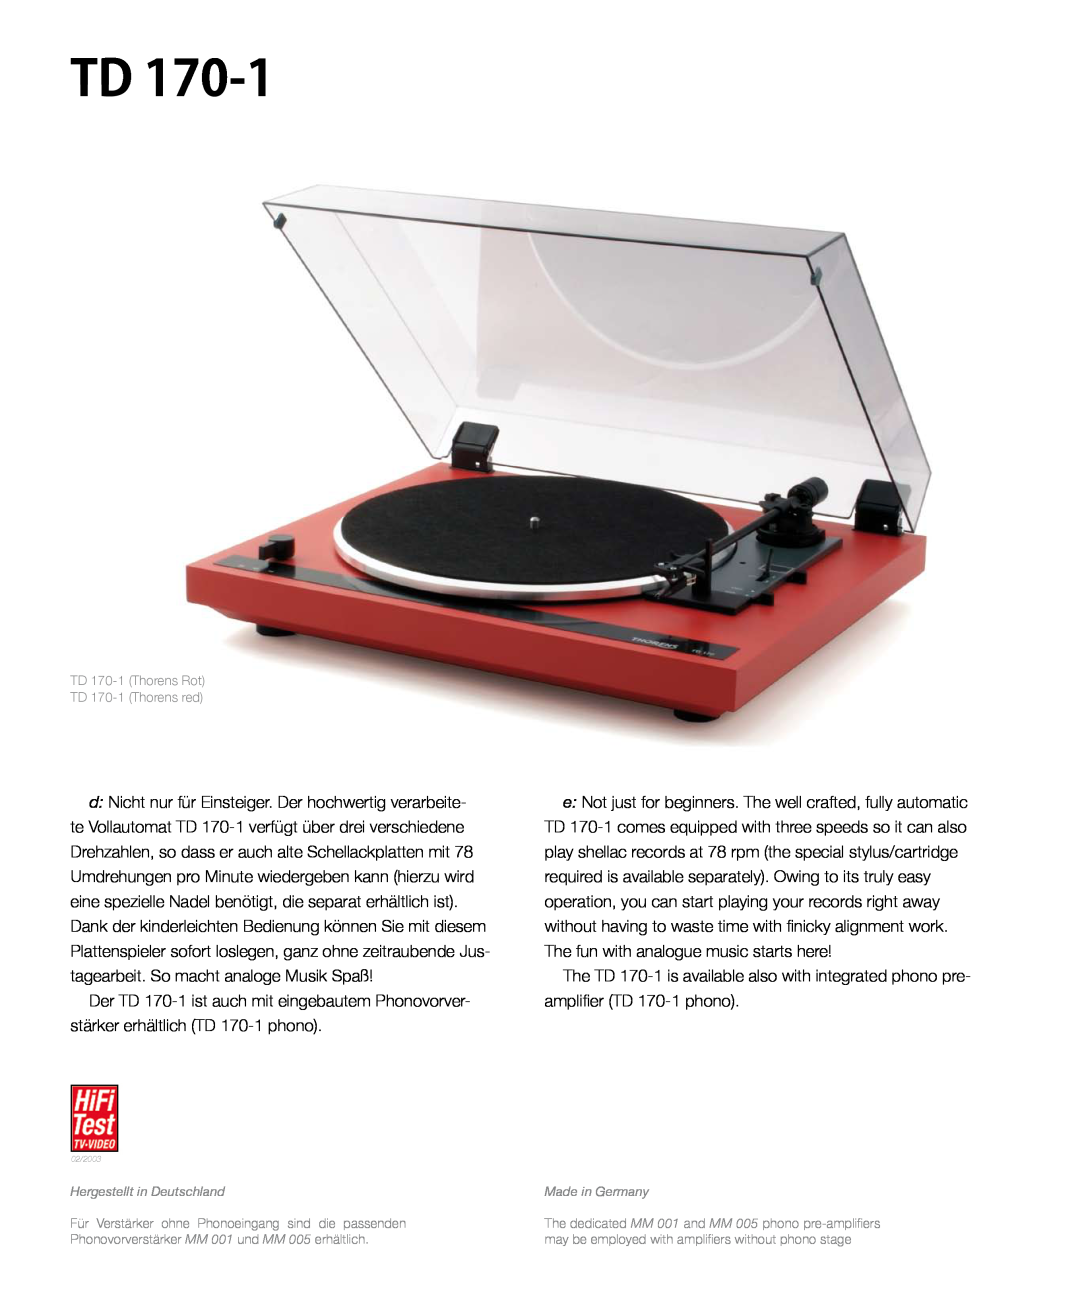 THORENS MM001 manual The fun with analogue music starts here 